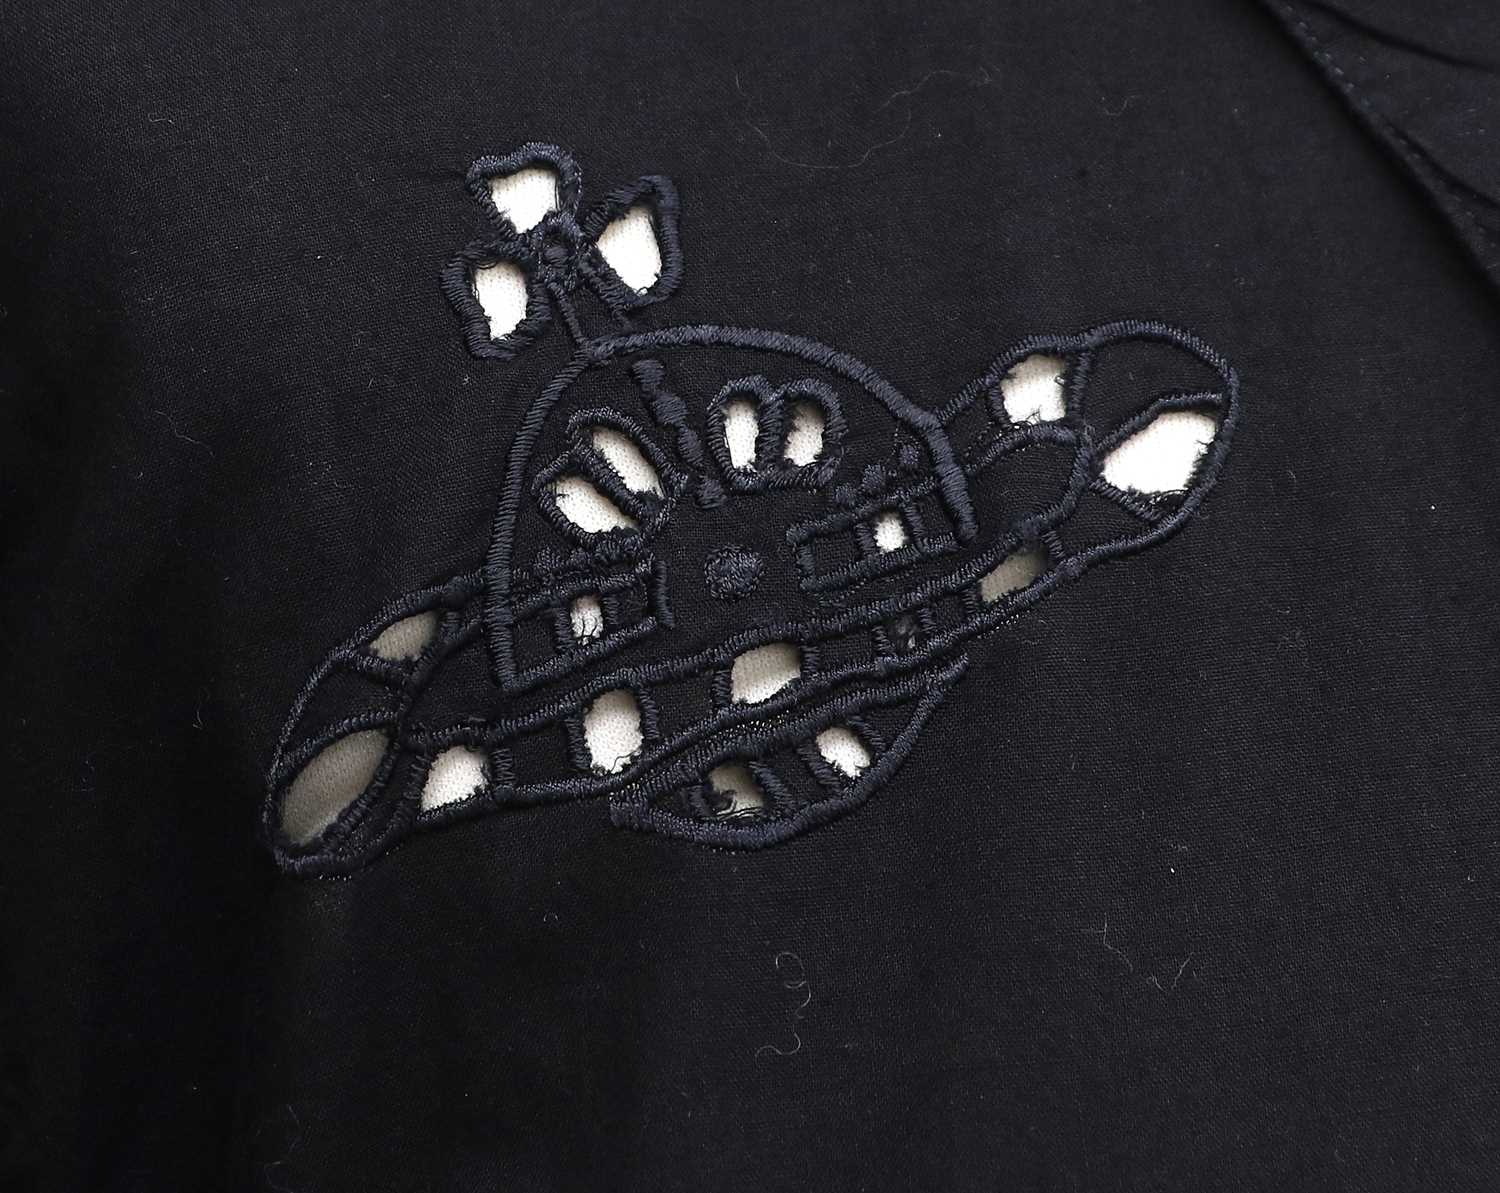 Circa 1990s Vivienne Westwood Black Cotton Long Sleeve Shirt, with cut work and embroidered orbs - Image 3 of 4